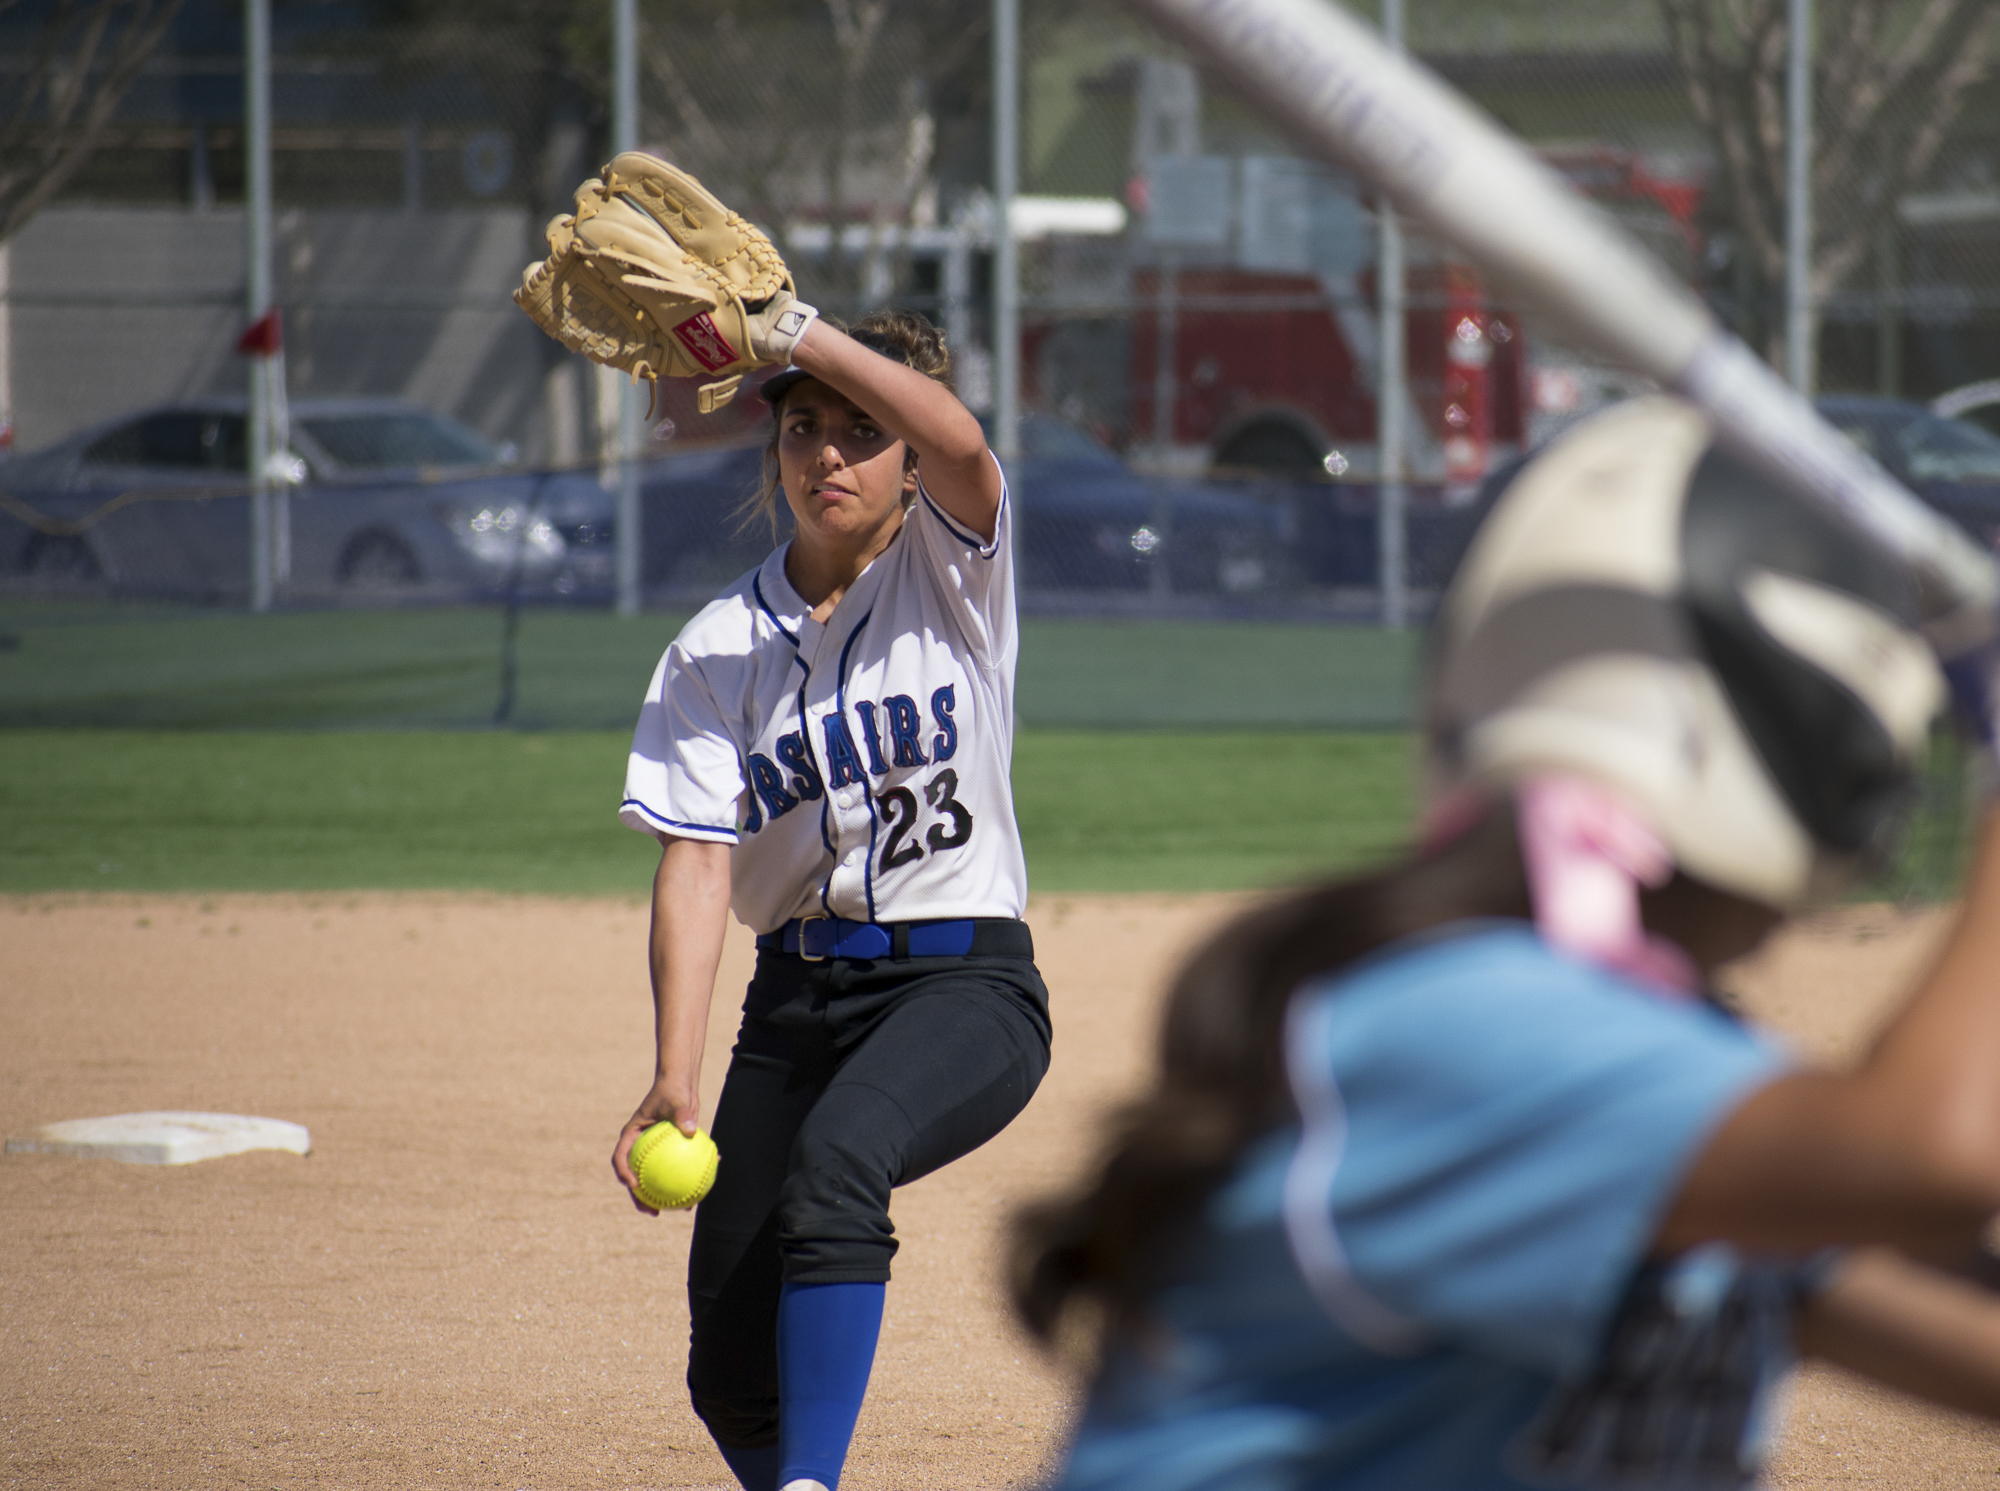  Santa Monica Corsairs Taylor Liebesman (#23) pitches during a softball game against the Moorpark College Raiders on Tuesday, April 10 at the John Adams Middle School Field in Santa Monica, California. The game ended with an 11-8 loss for the Corsair